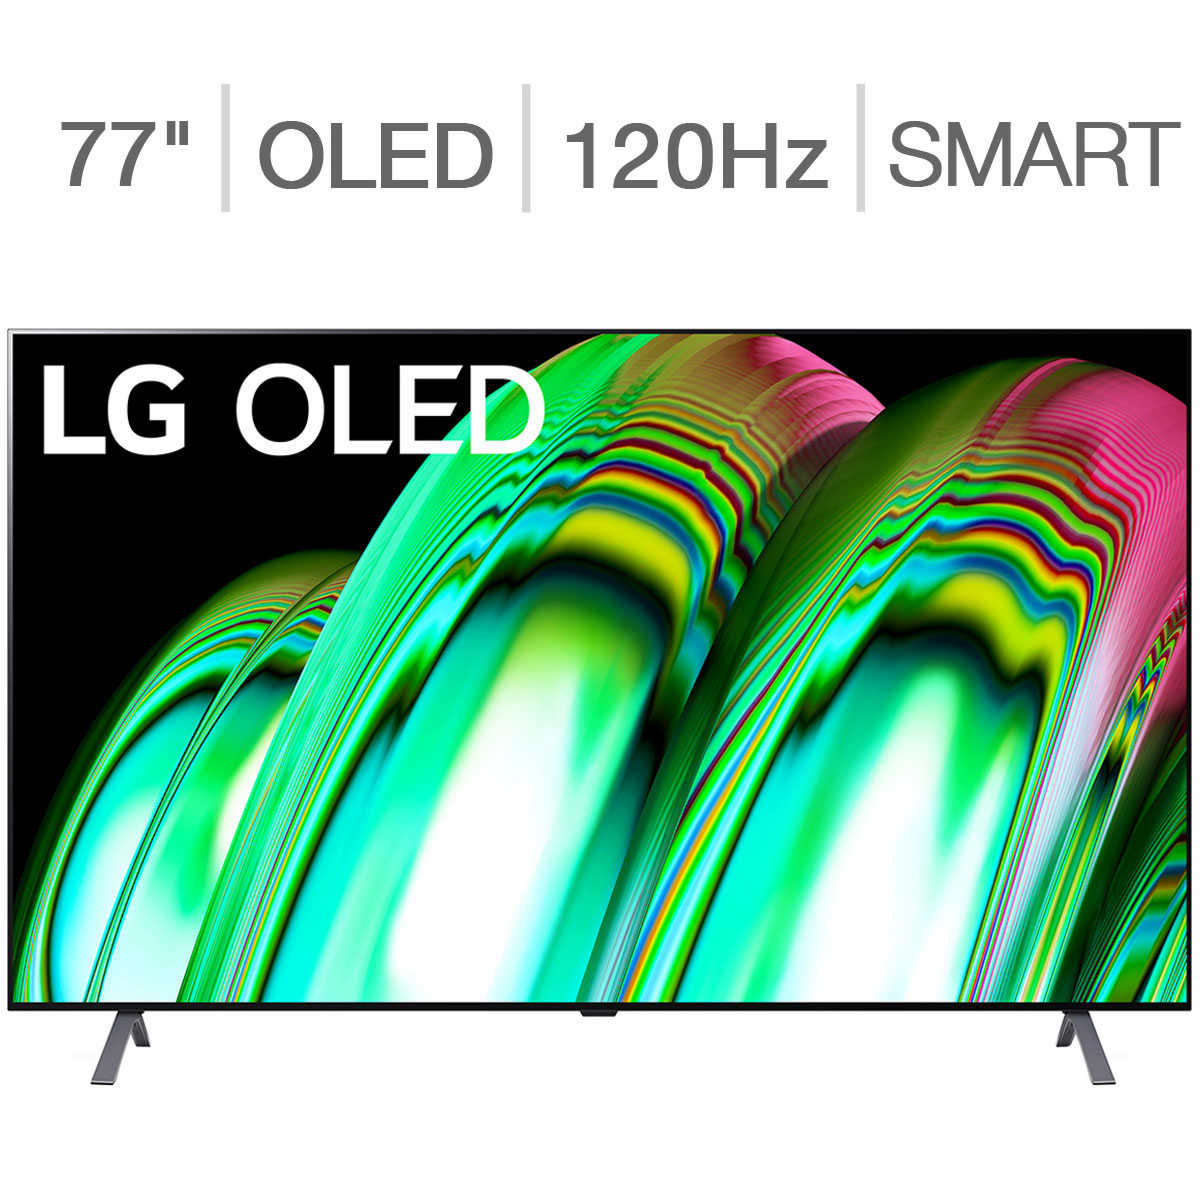 LG OLED C3 Series User Manual, Specifications, and Product Information